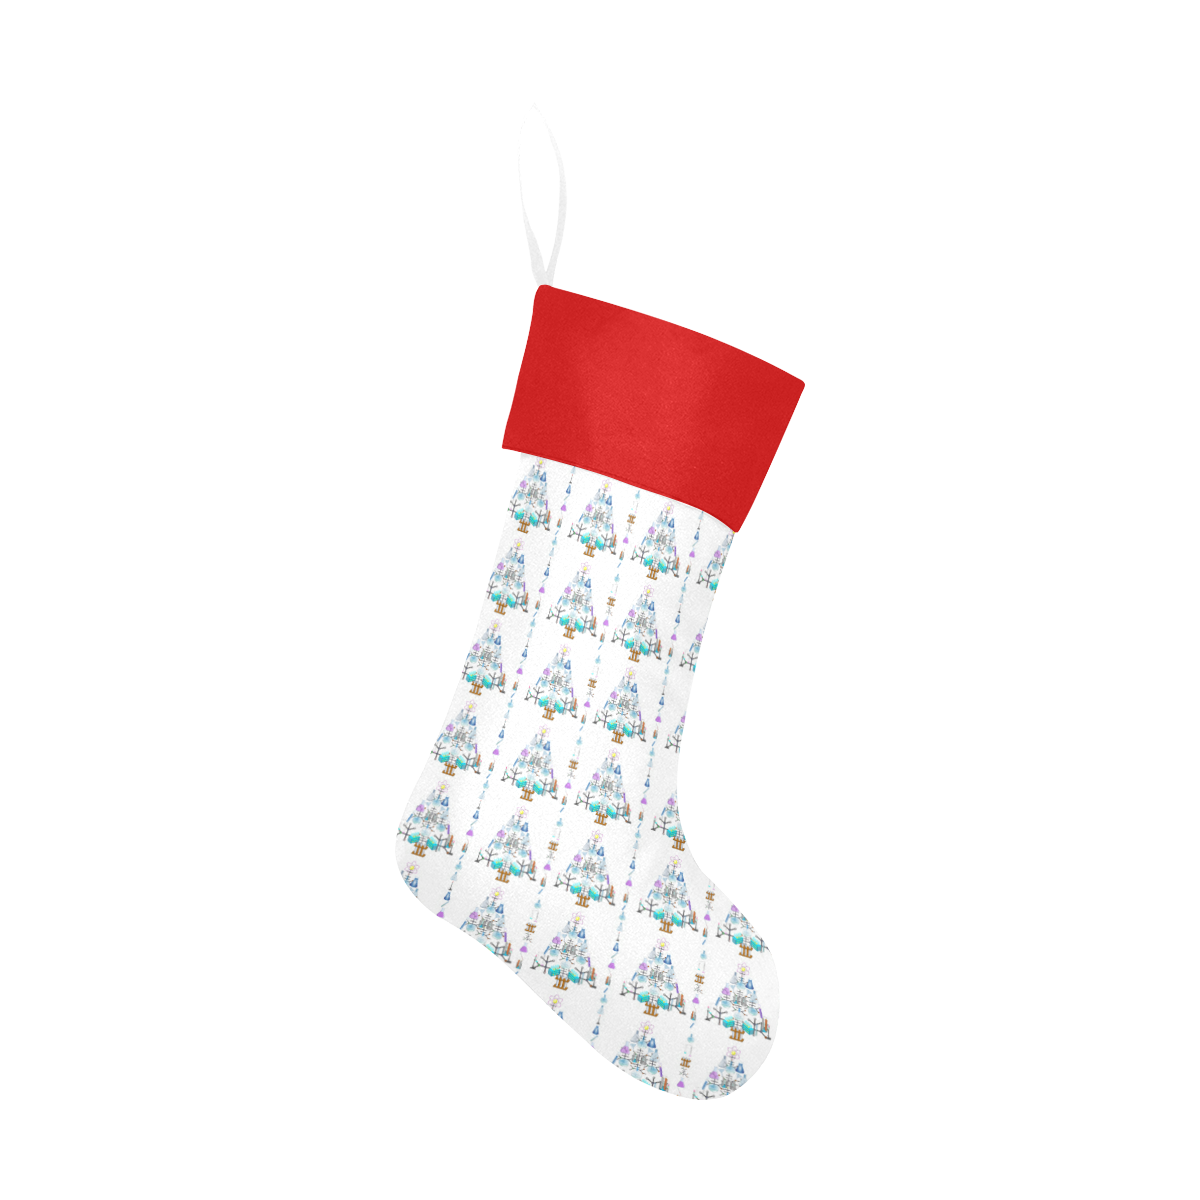 Oh Chemist Tree, Oh Chemistry, Science Red Top Christmas Stocking